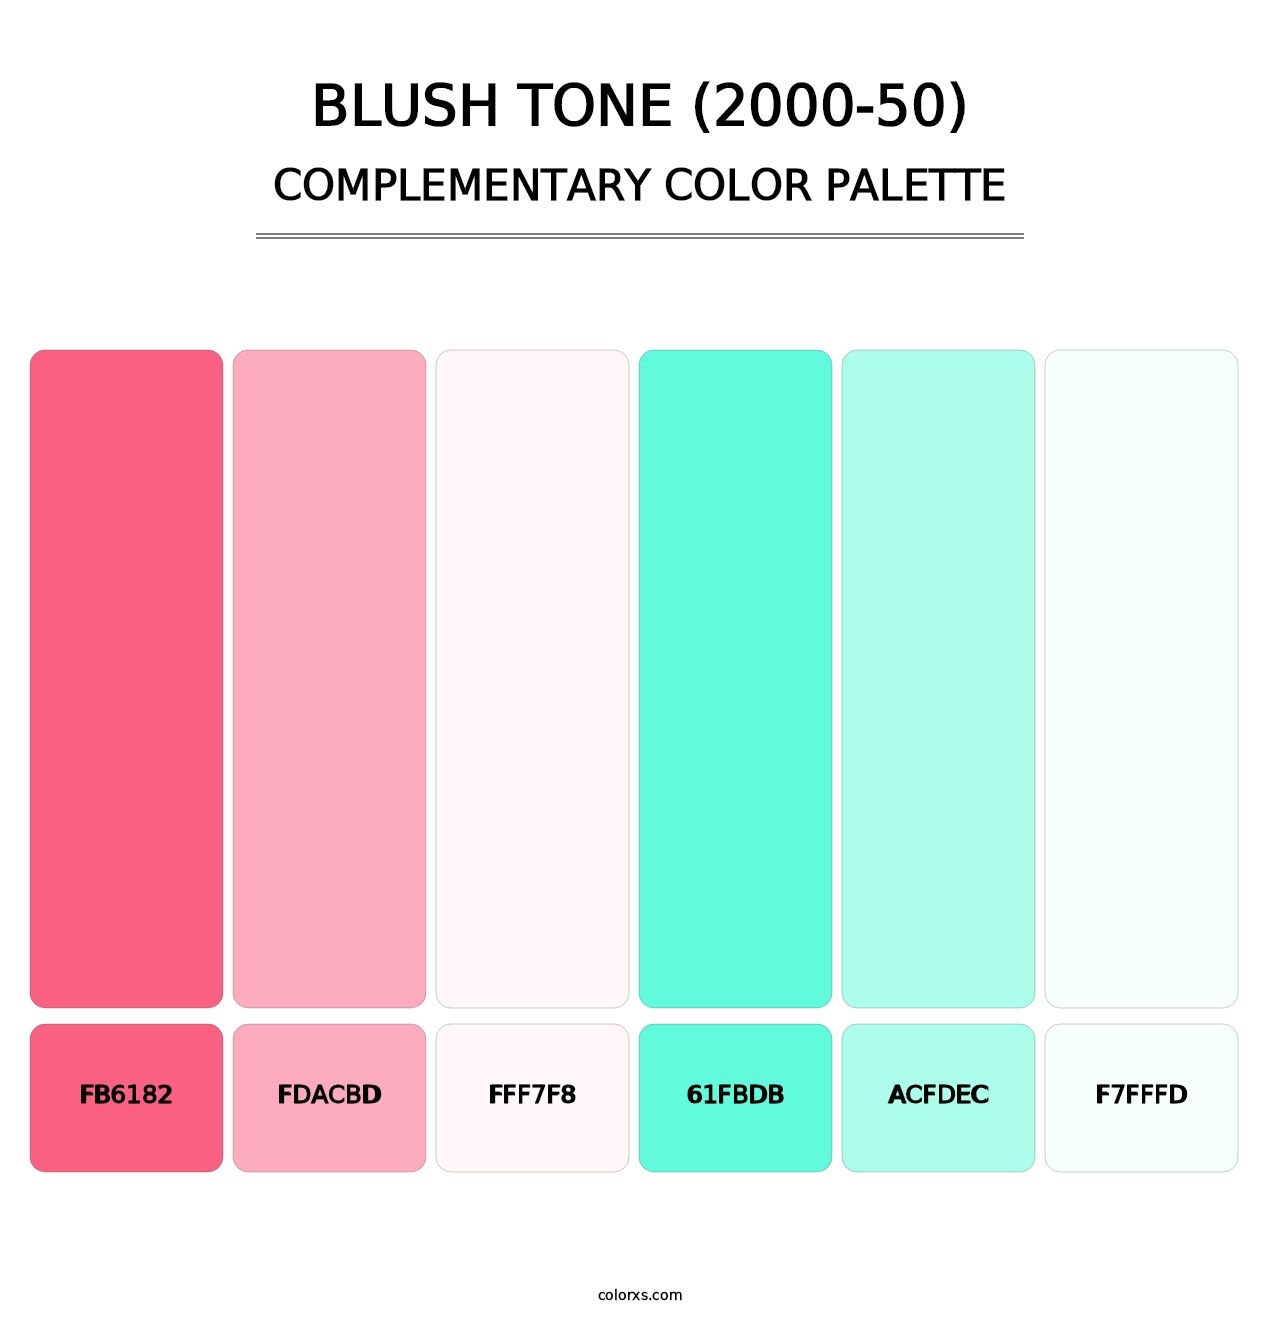 Blush Tone (2000-50) - Complementary Color Palette